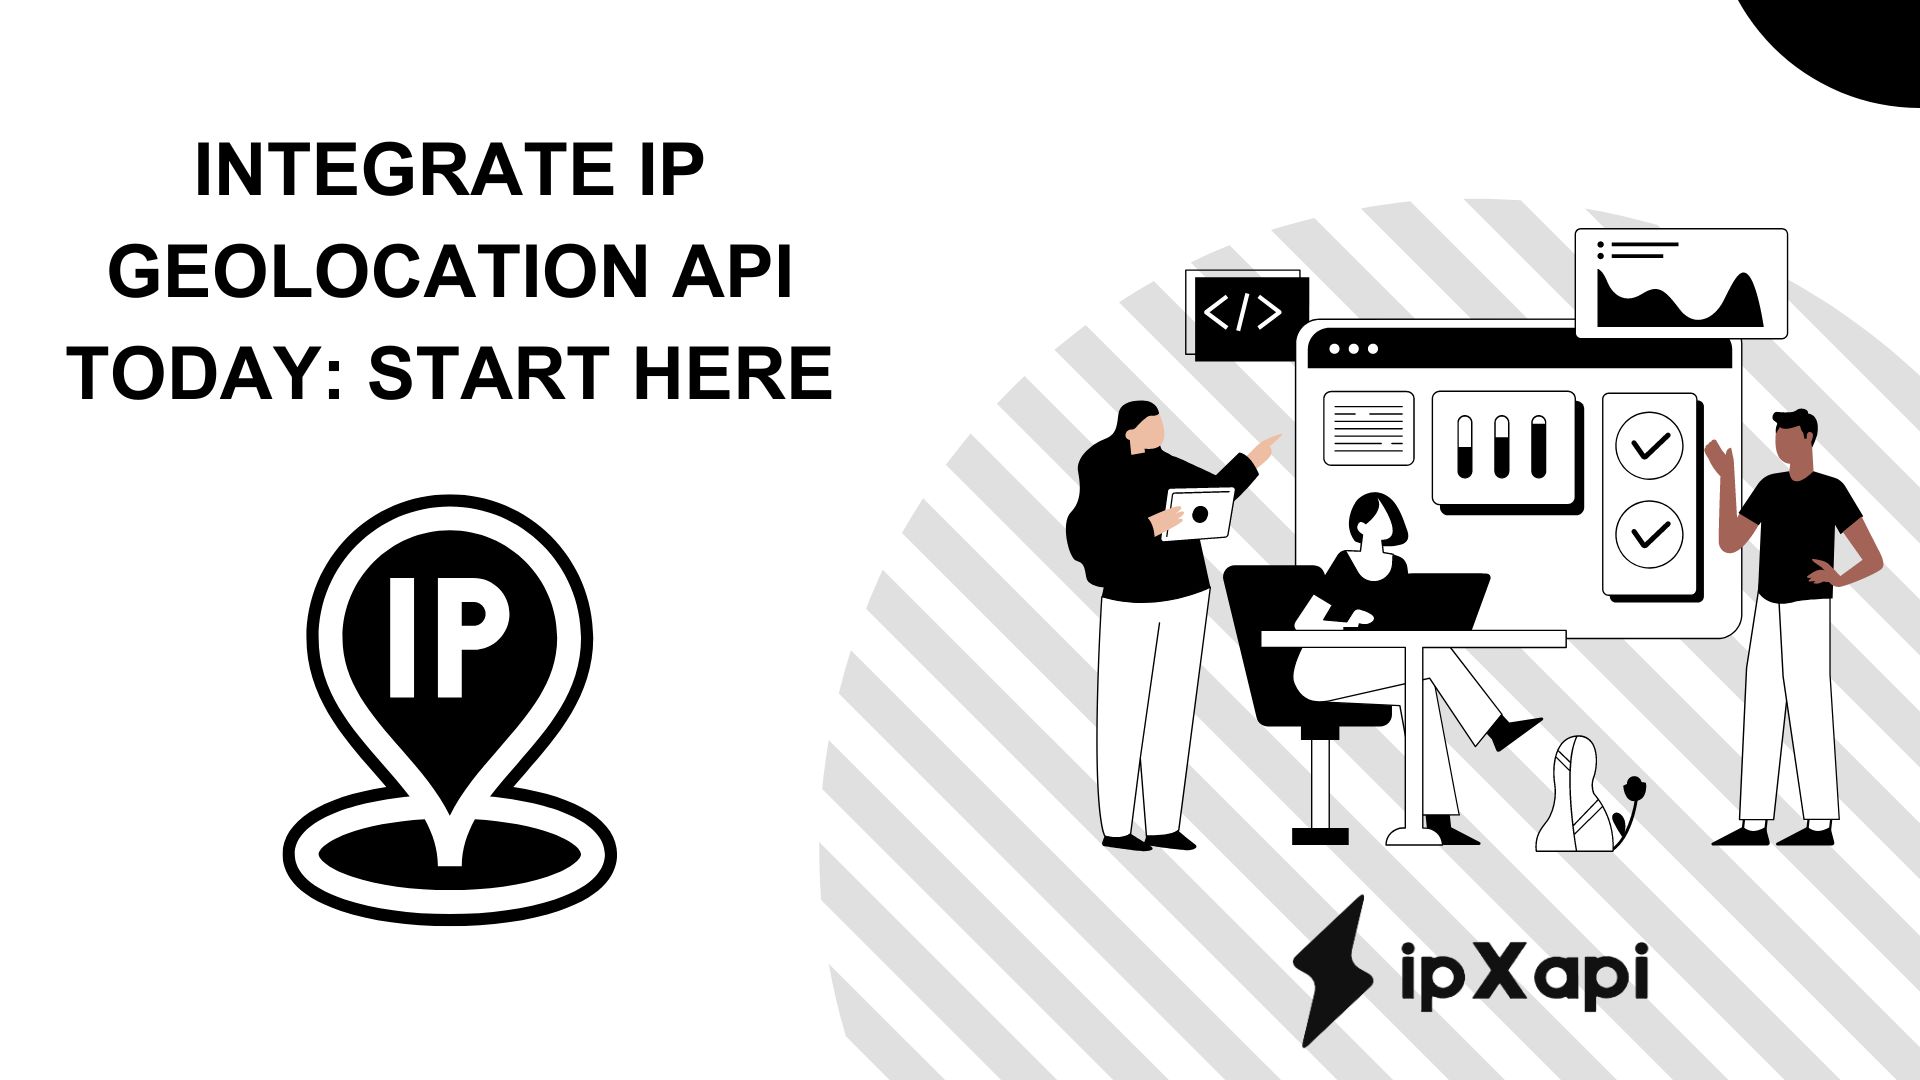 Integrate IP Geolocation API Today: Start Here